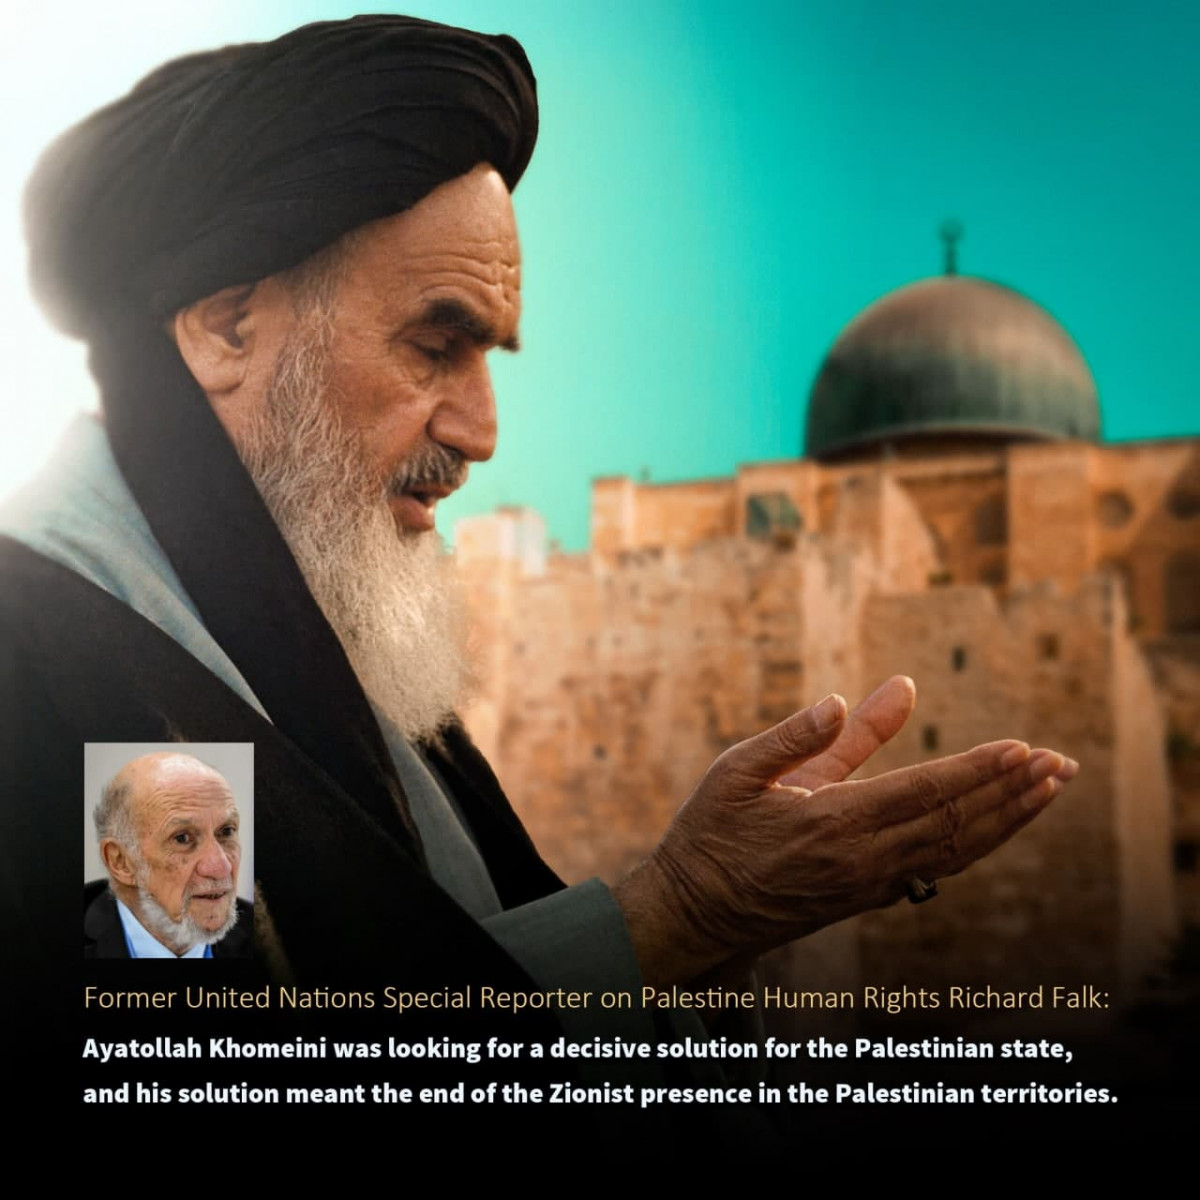 Ayatollah Khomeini was looking for a decisive solution for the Palestinian state